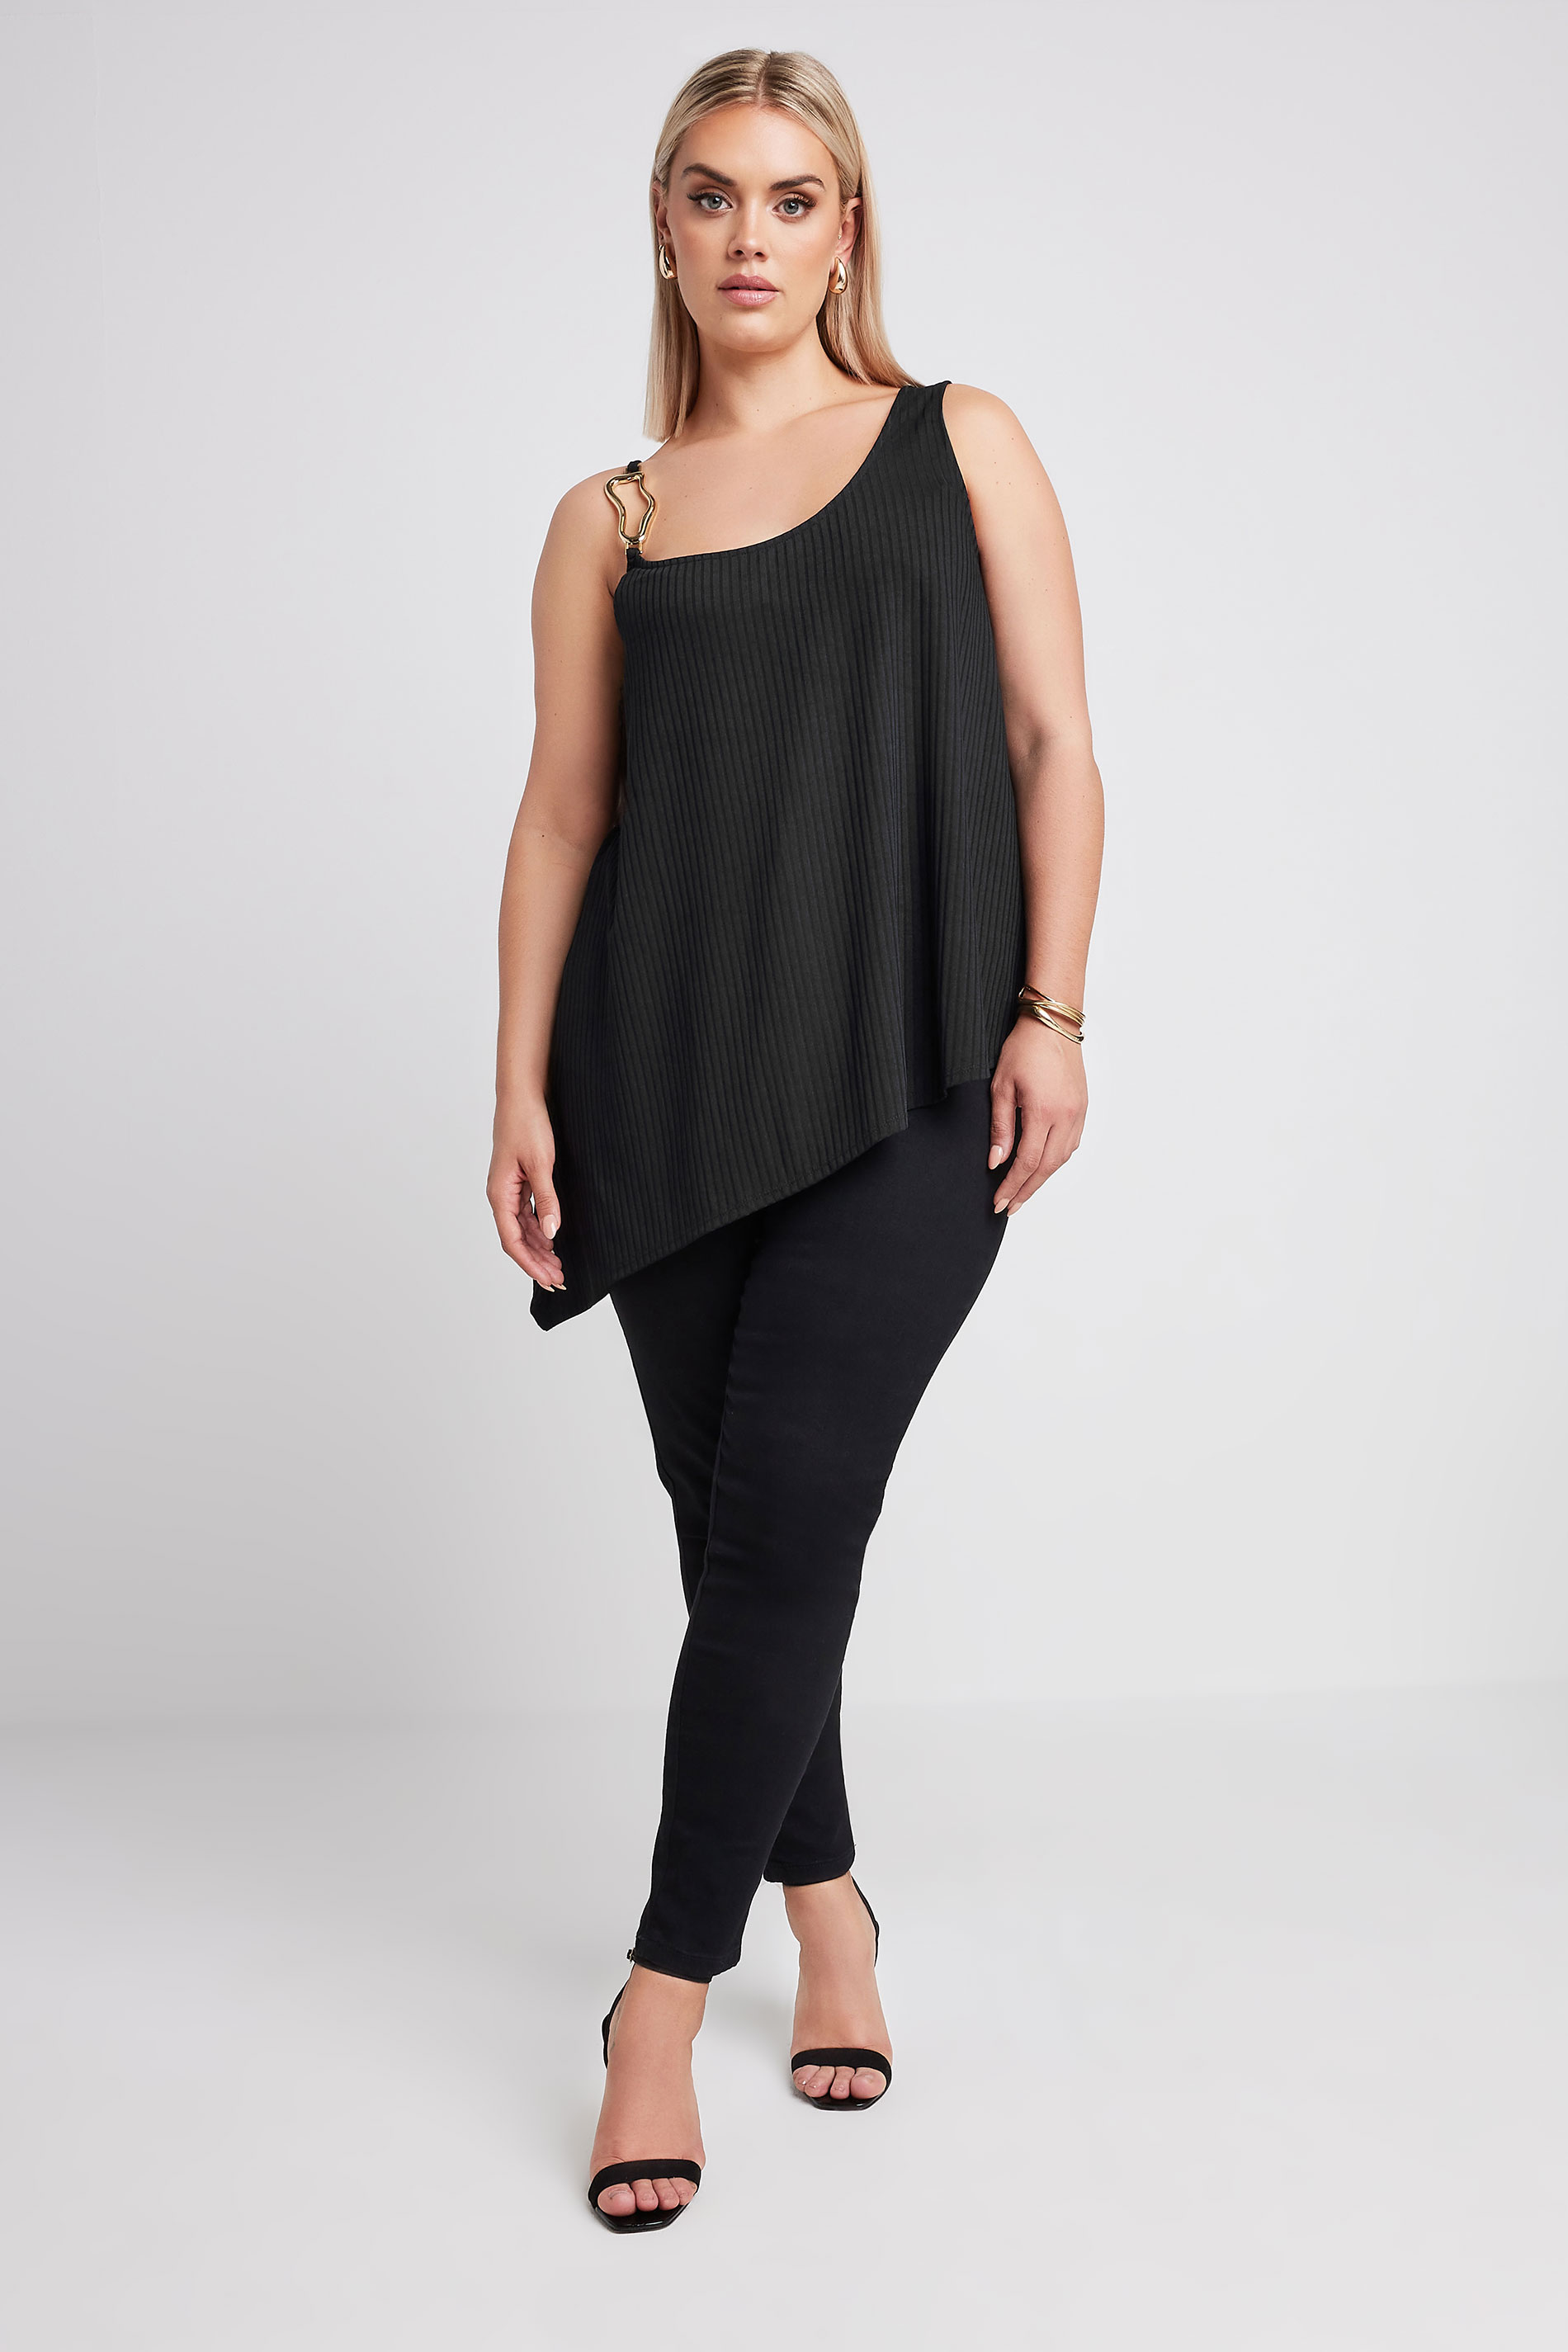 LIMITED COLLECTION Plus Size Black Metal Trim Ribbed Vest Top | Yours Clothing 2